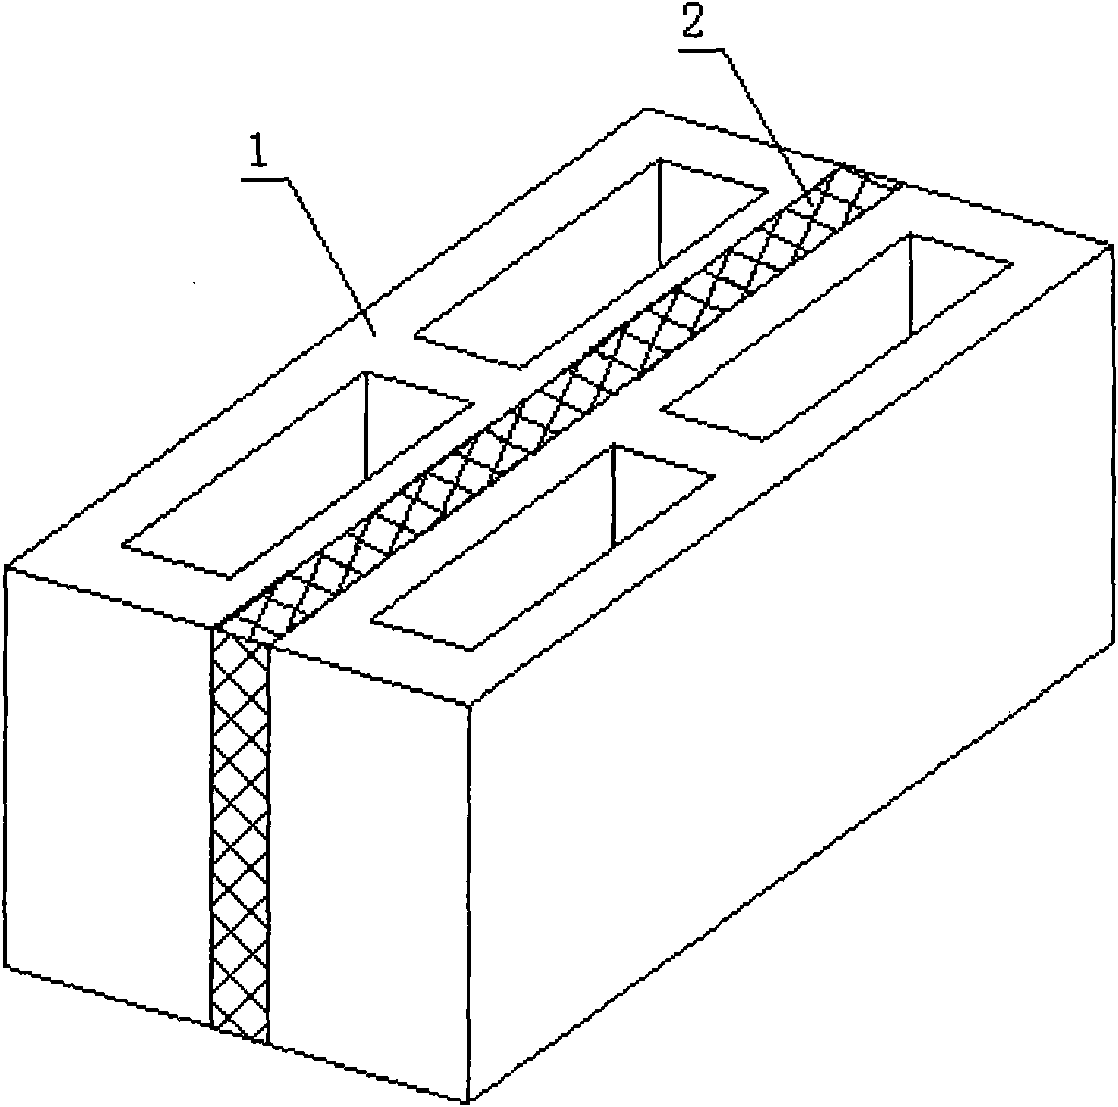 Sandwiched mortar heat-insulating/warm-keeping block, preparation and application thereof